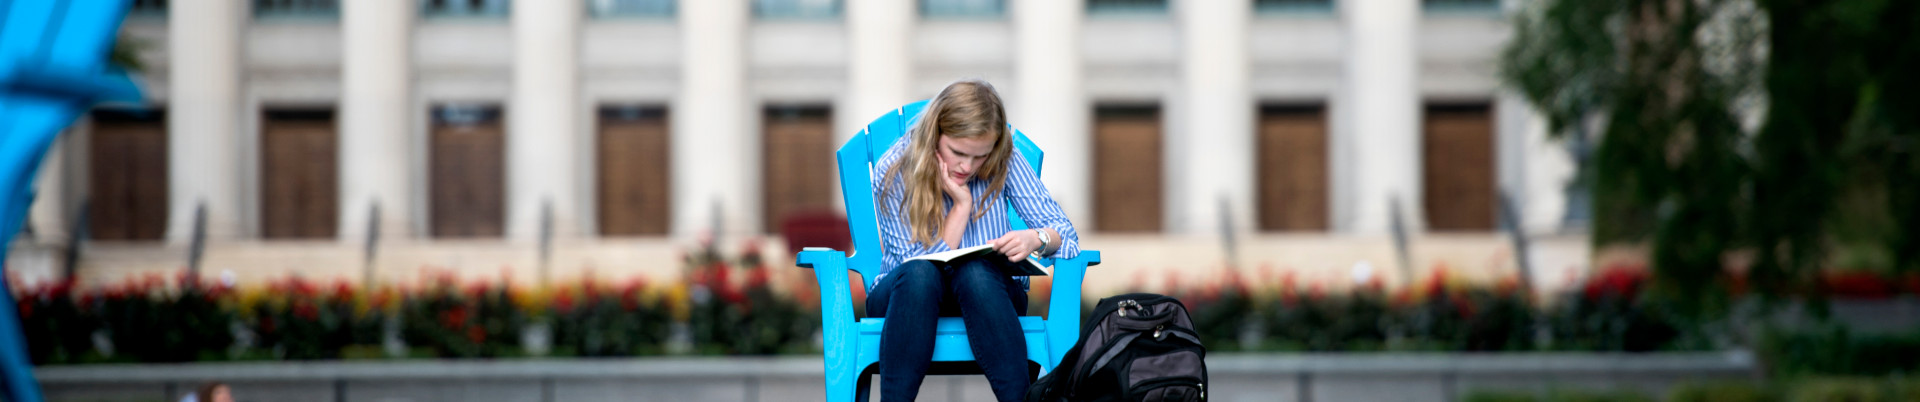 A student sits on the mall lawn and studies